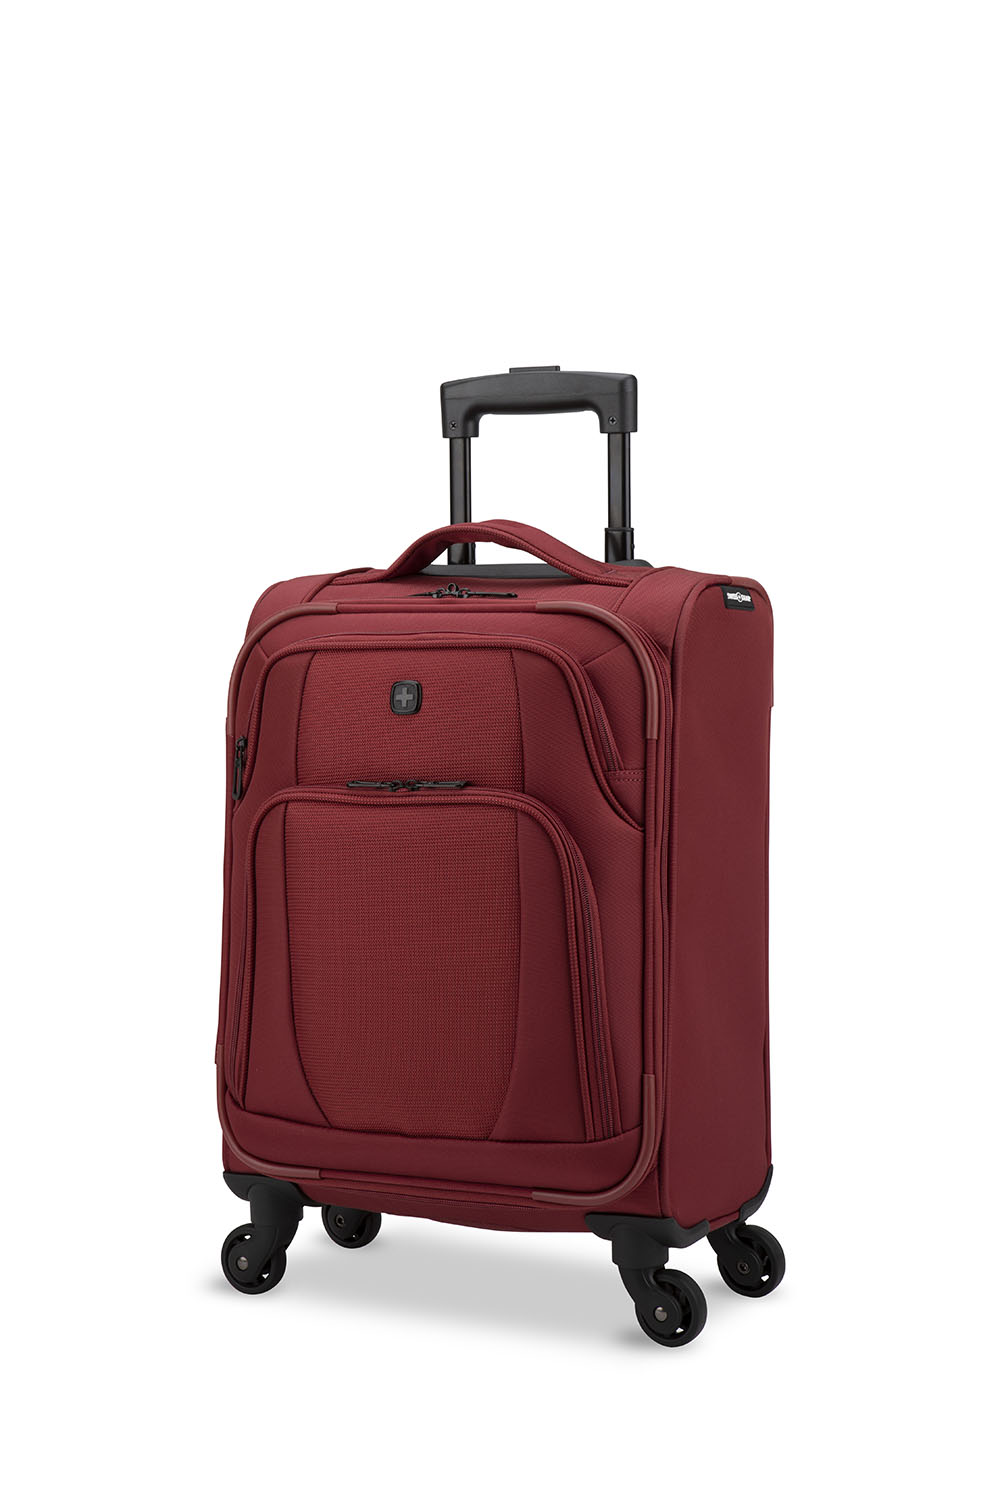 Swissgear Nouveau Collection Carry-On Upright Luggage